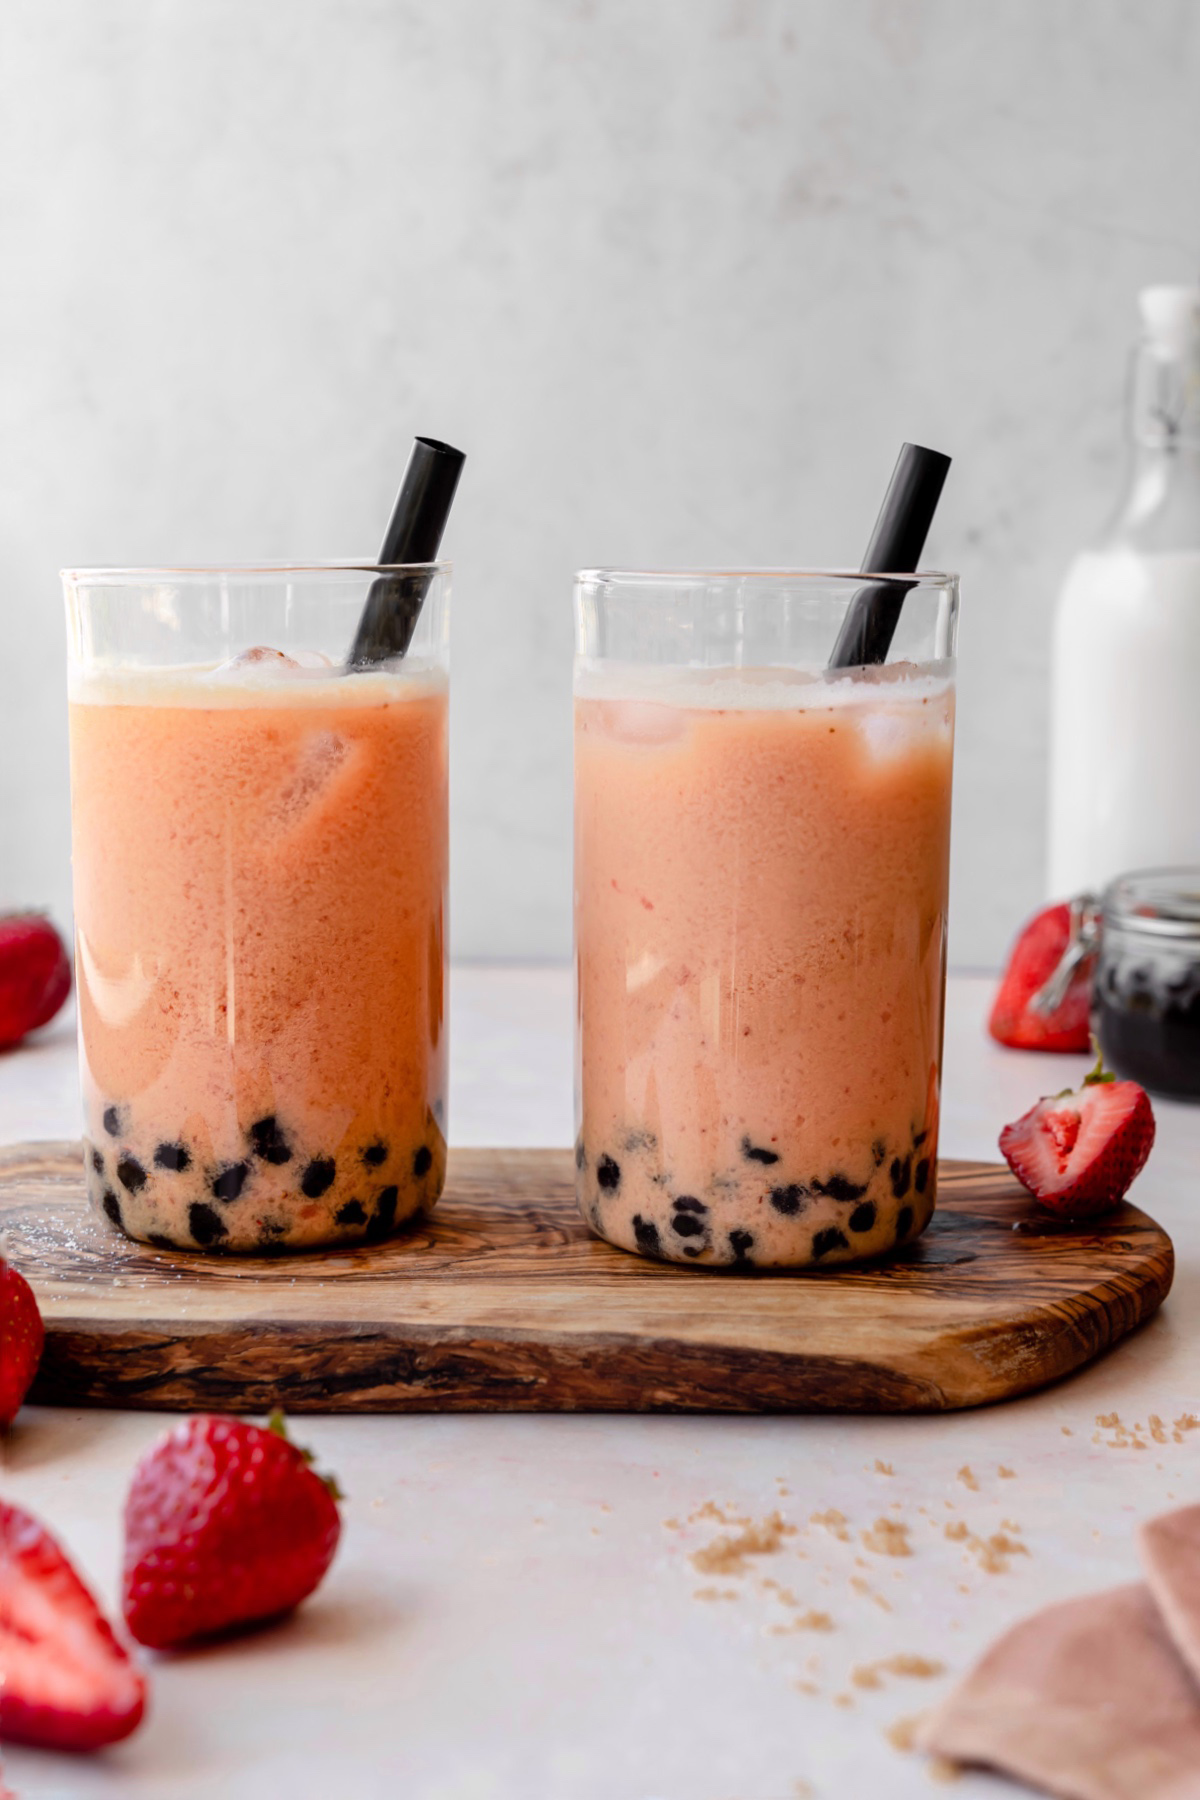 Glasses of strawberry bubble tea with milk and boba in the background.